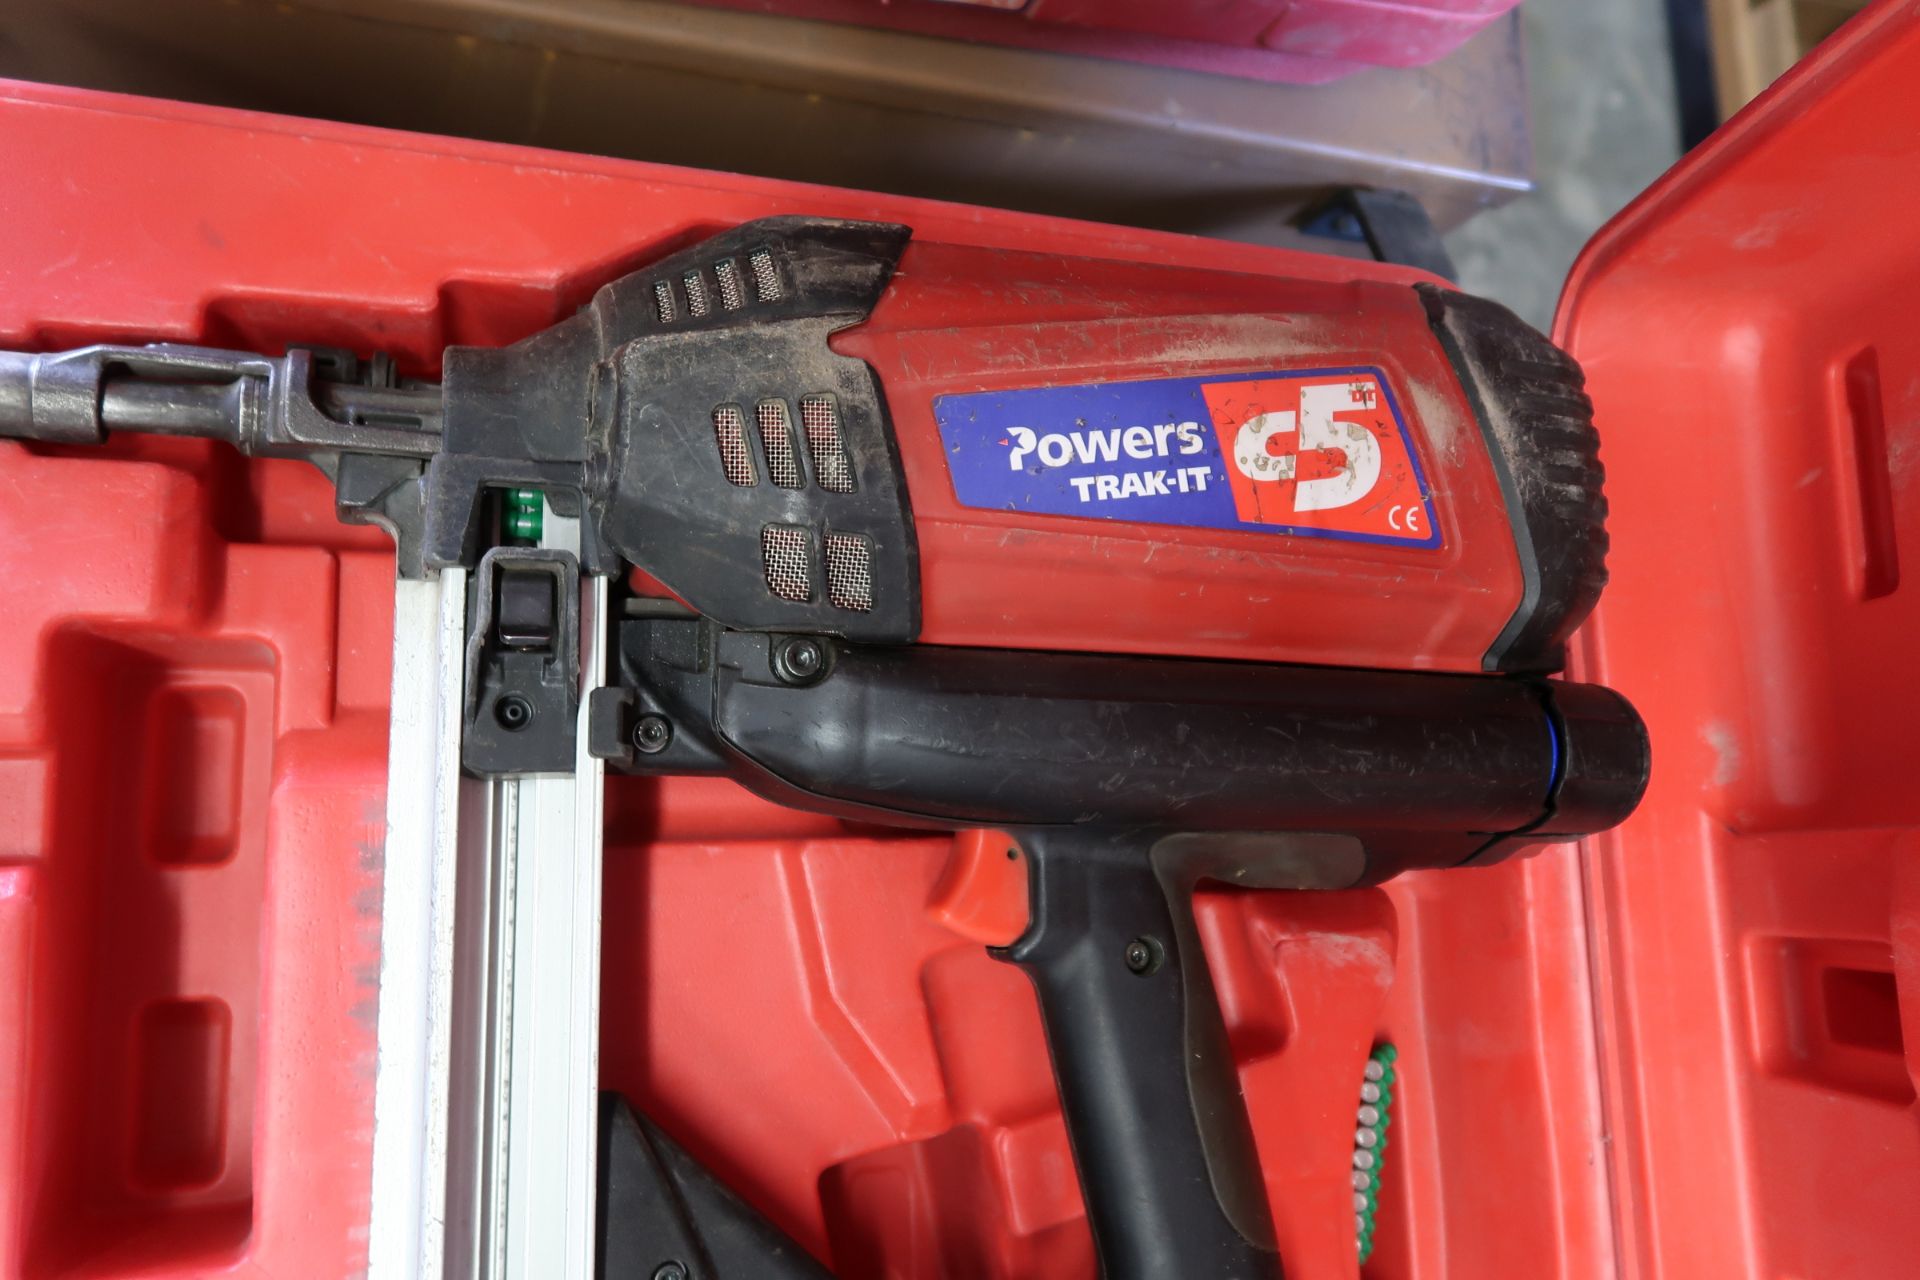 Powers "Trak-It C5" Cordless Nailers (2 - NO BATTERIES OR CHARGERS) (SOLD AS-IS - NO WARRANTY) - Image 5 of 5